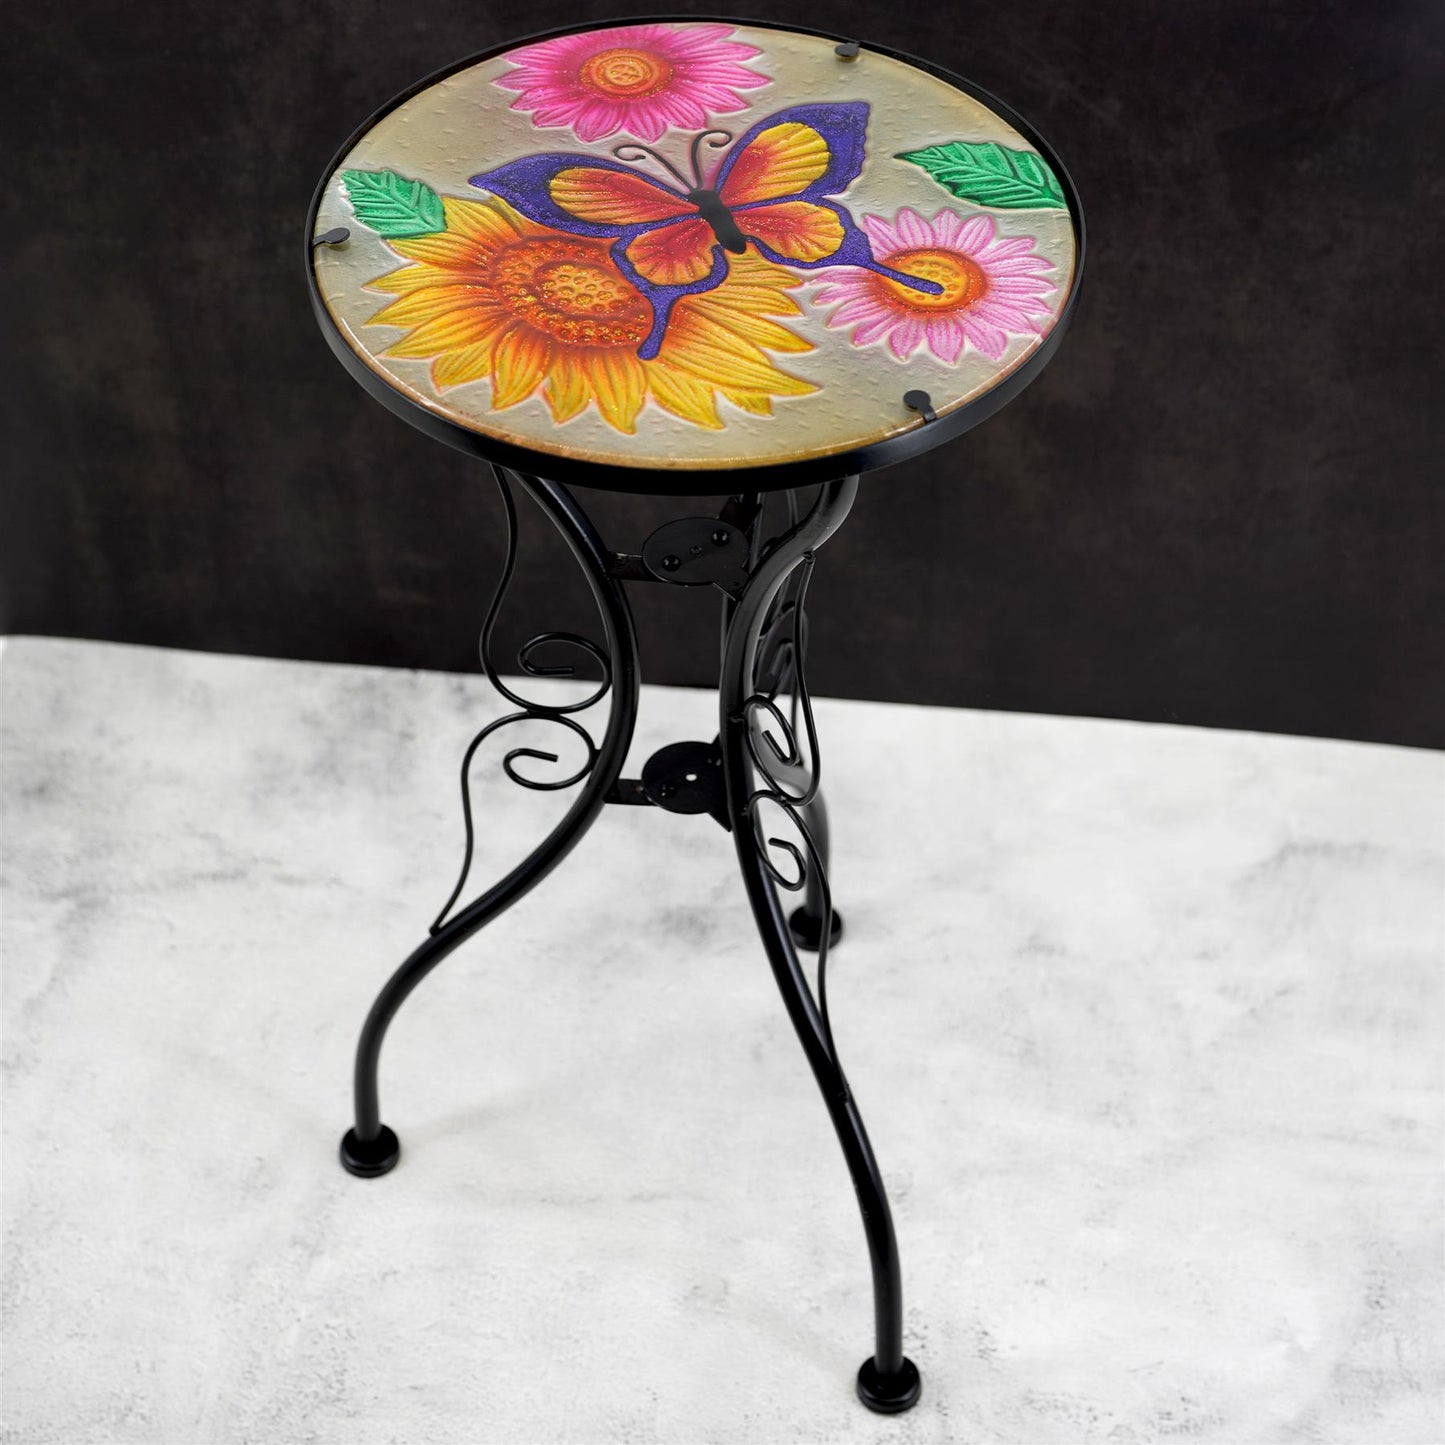 Round Side Garden Mosaic Table  With Flowers and Butterfly Design by Geezy - UKBuyZone